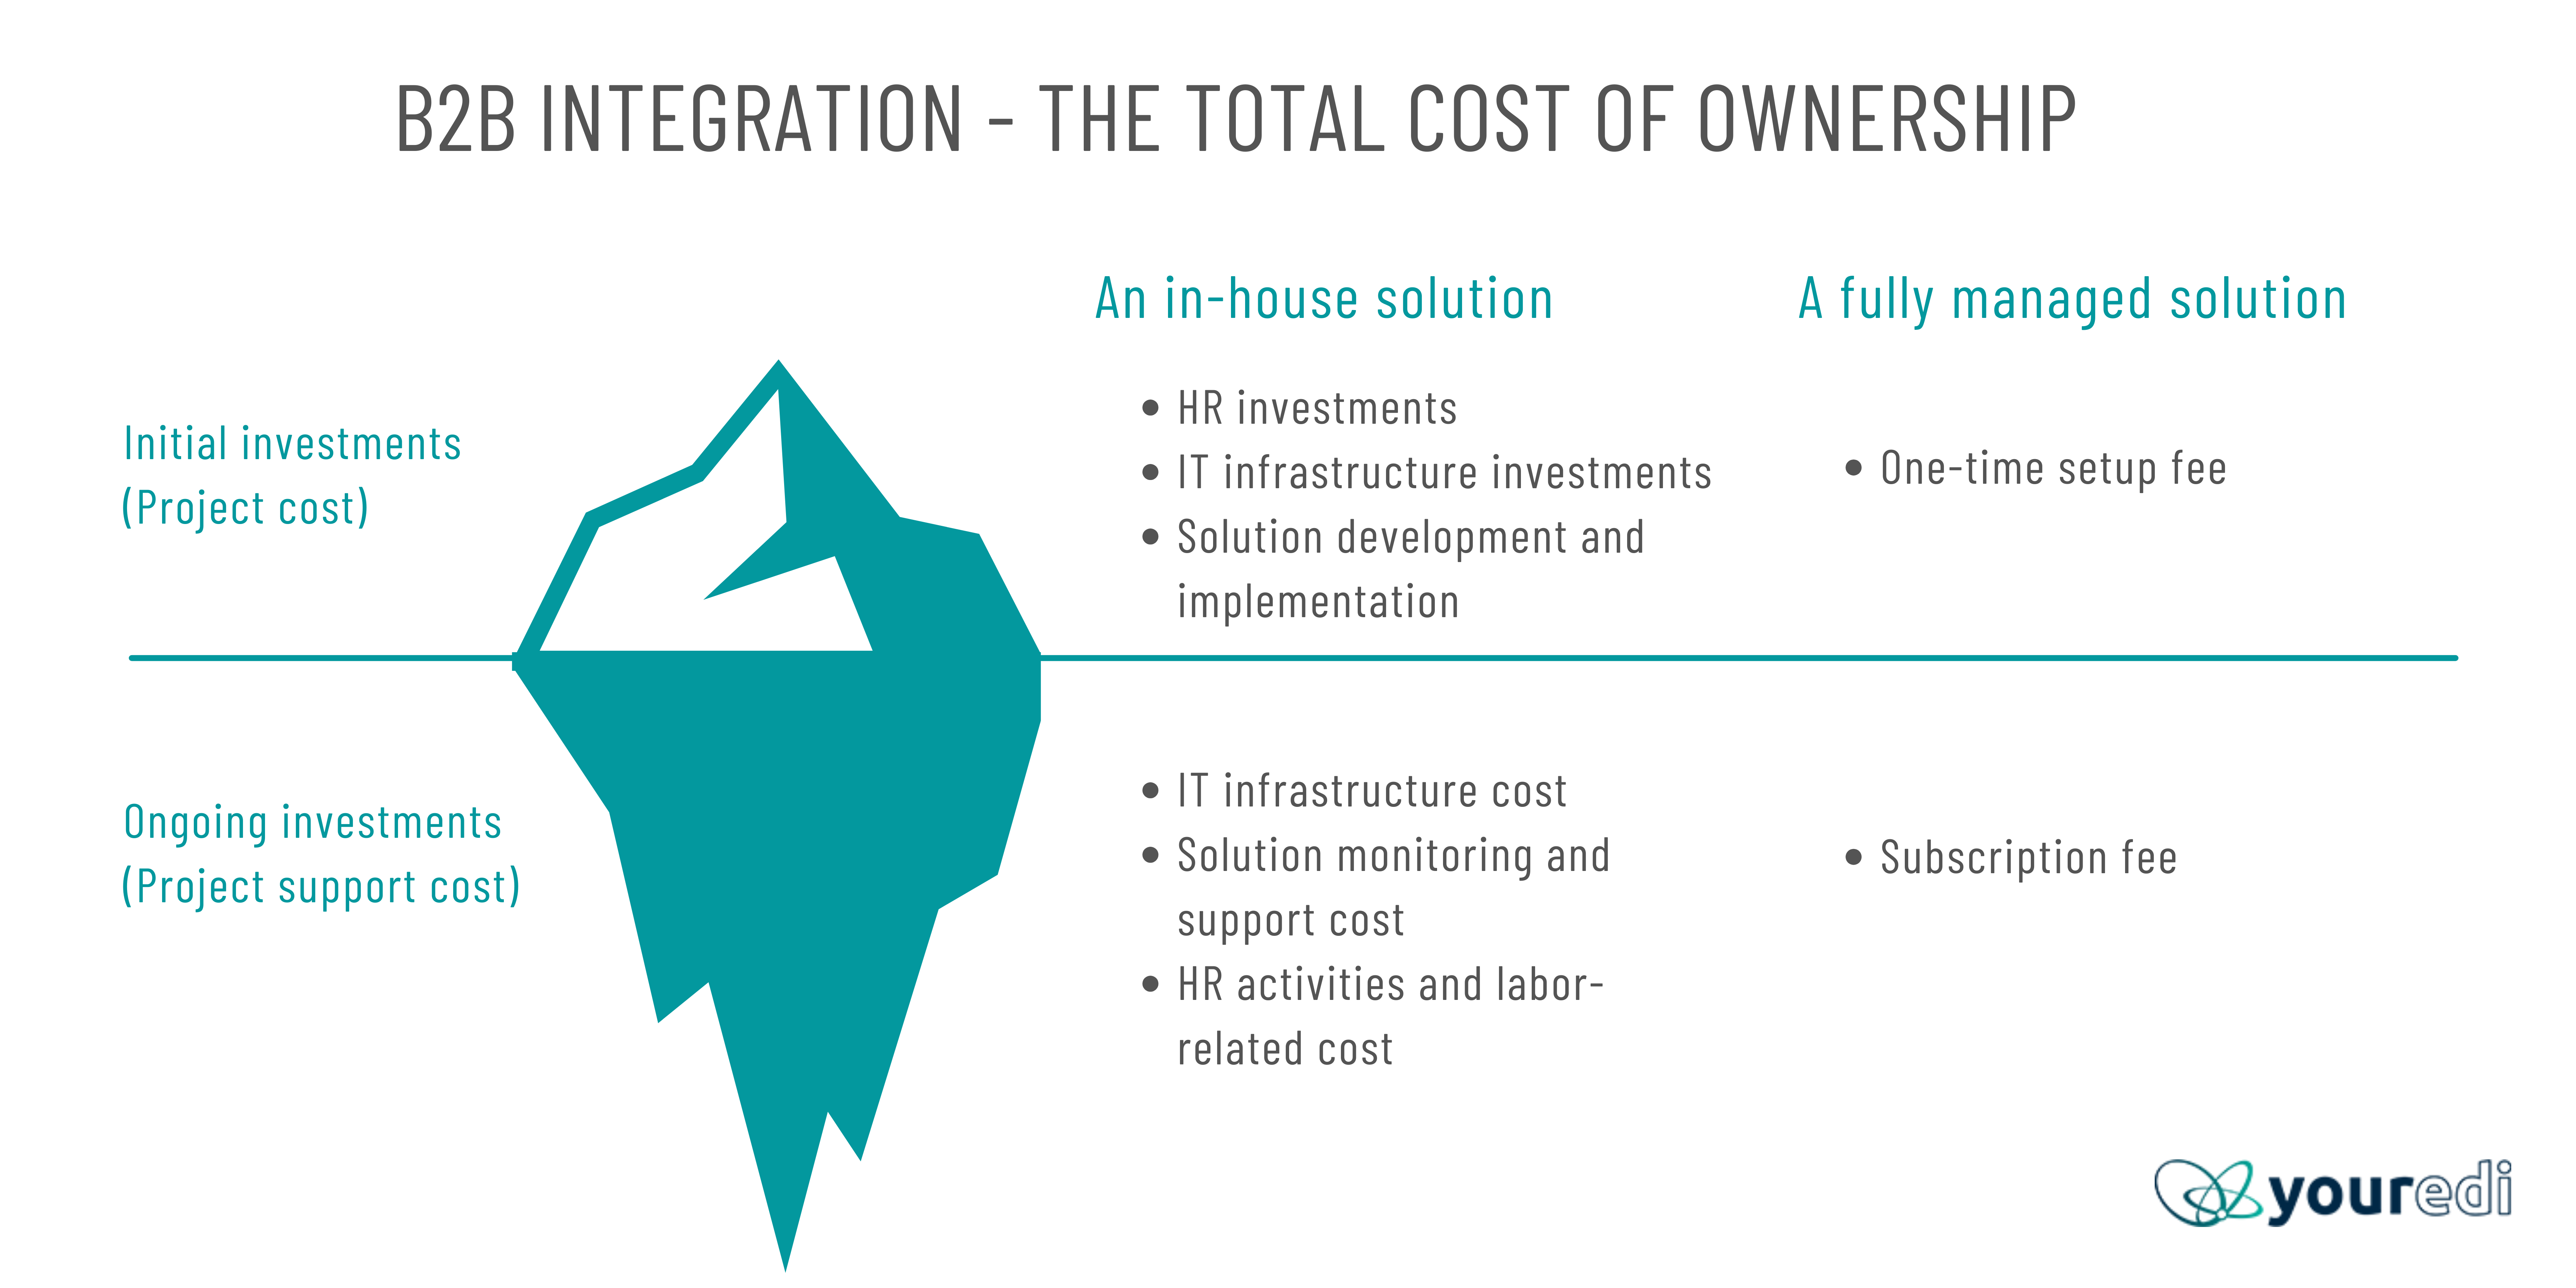 1 b2b integration - the TOTAL COST OF OWNERSHIP